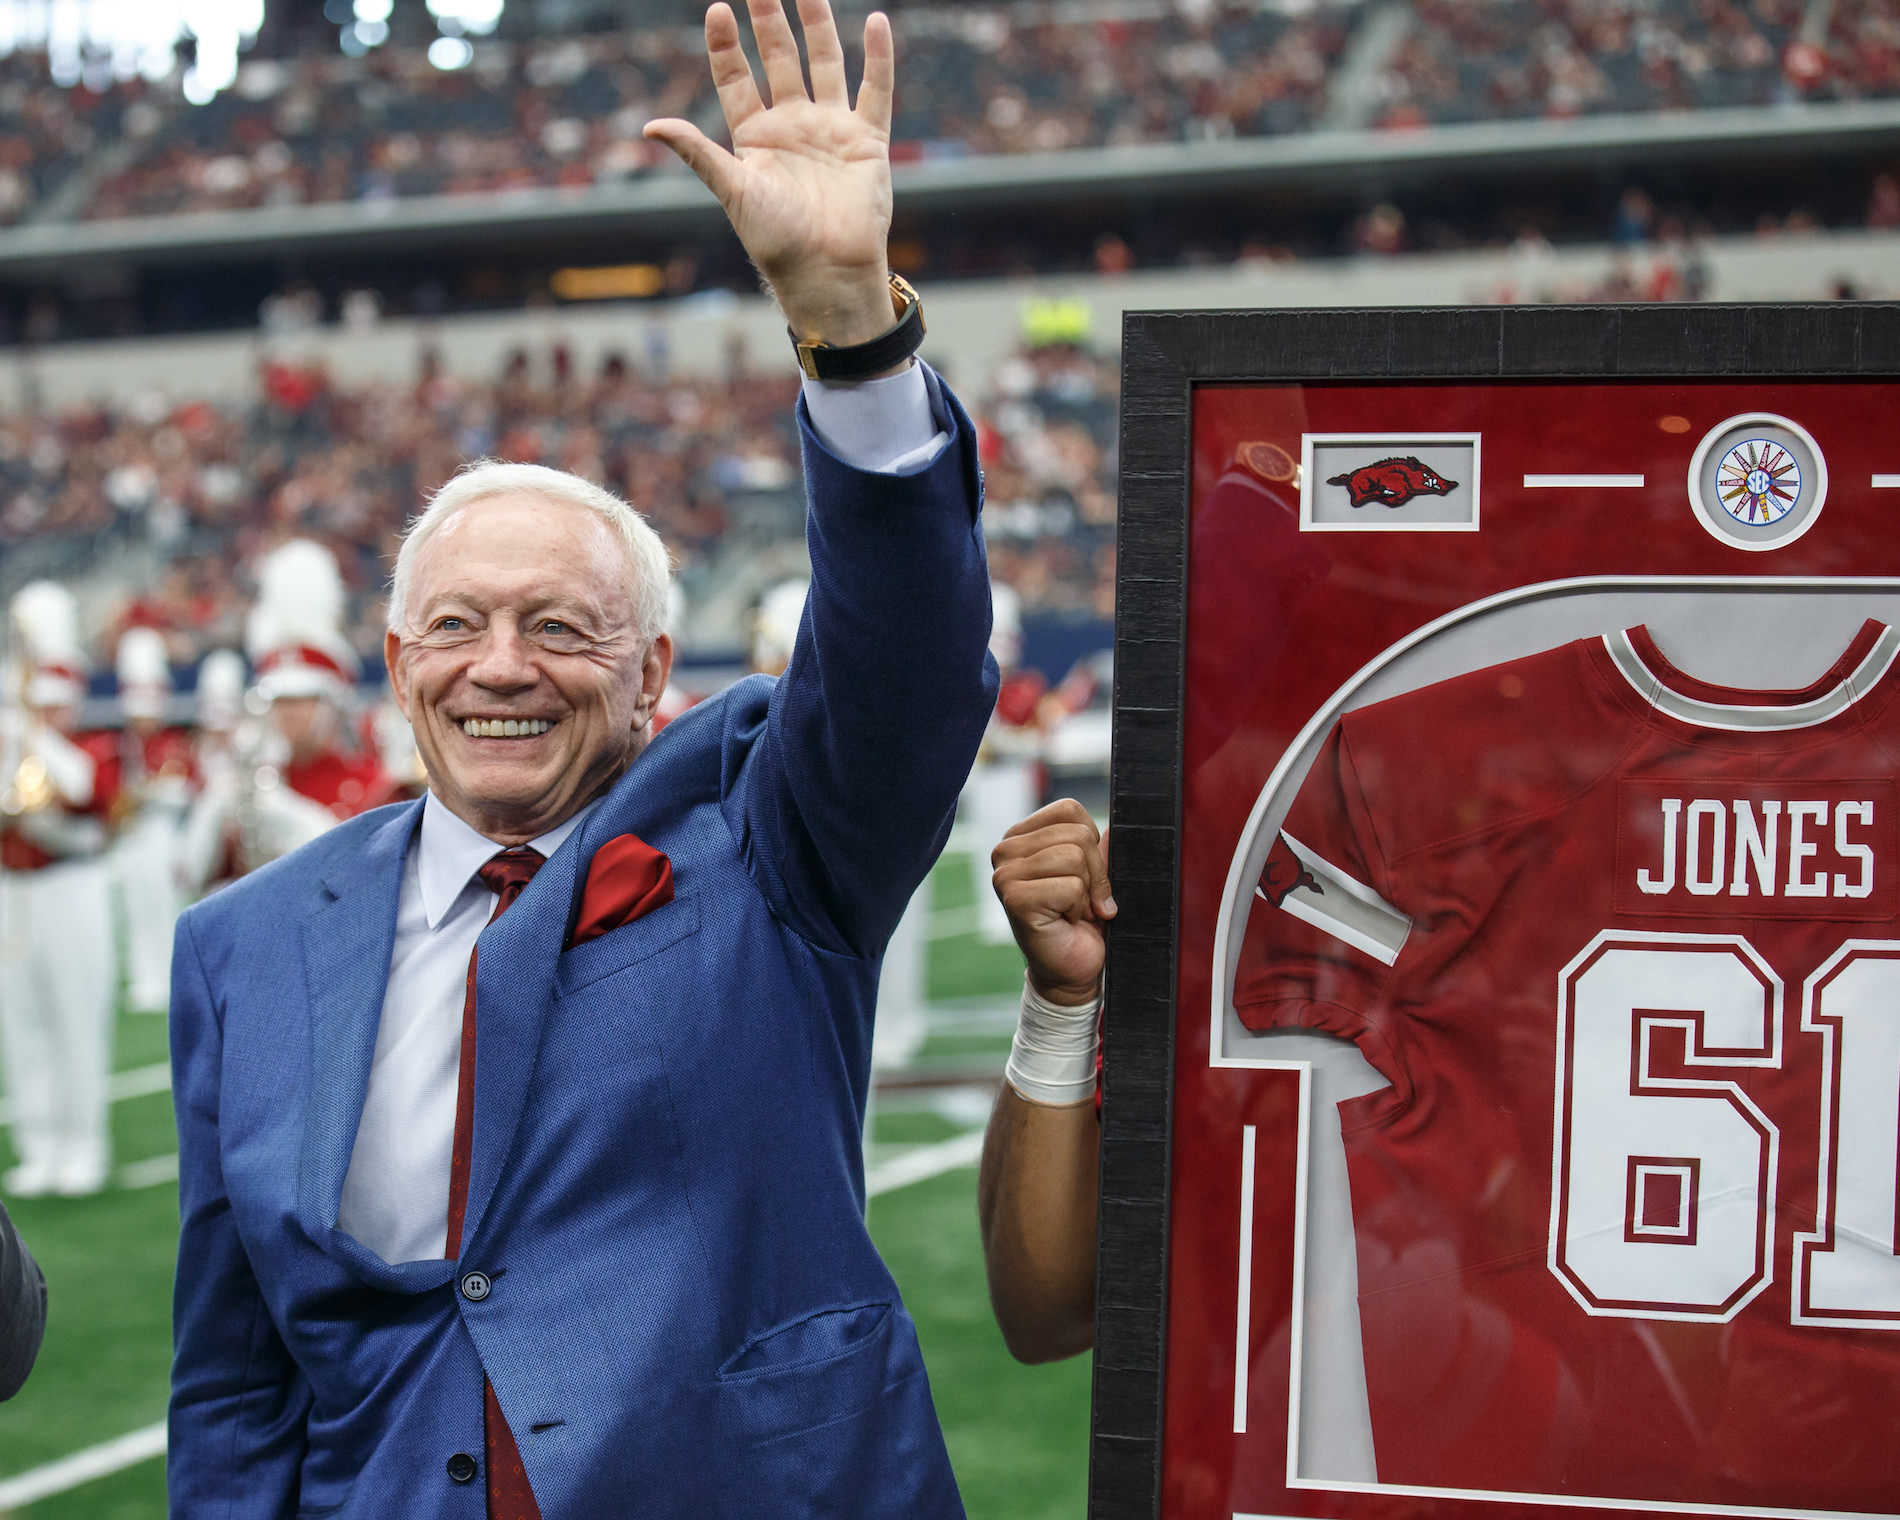 You know Jerry Jones, the billionaire owner of the Dallas Cowboys, but do you know Jerry Jones, the Arkansas football star?